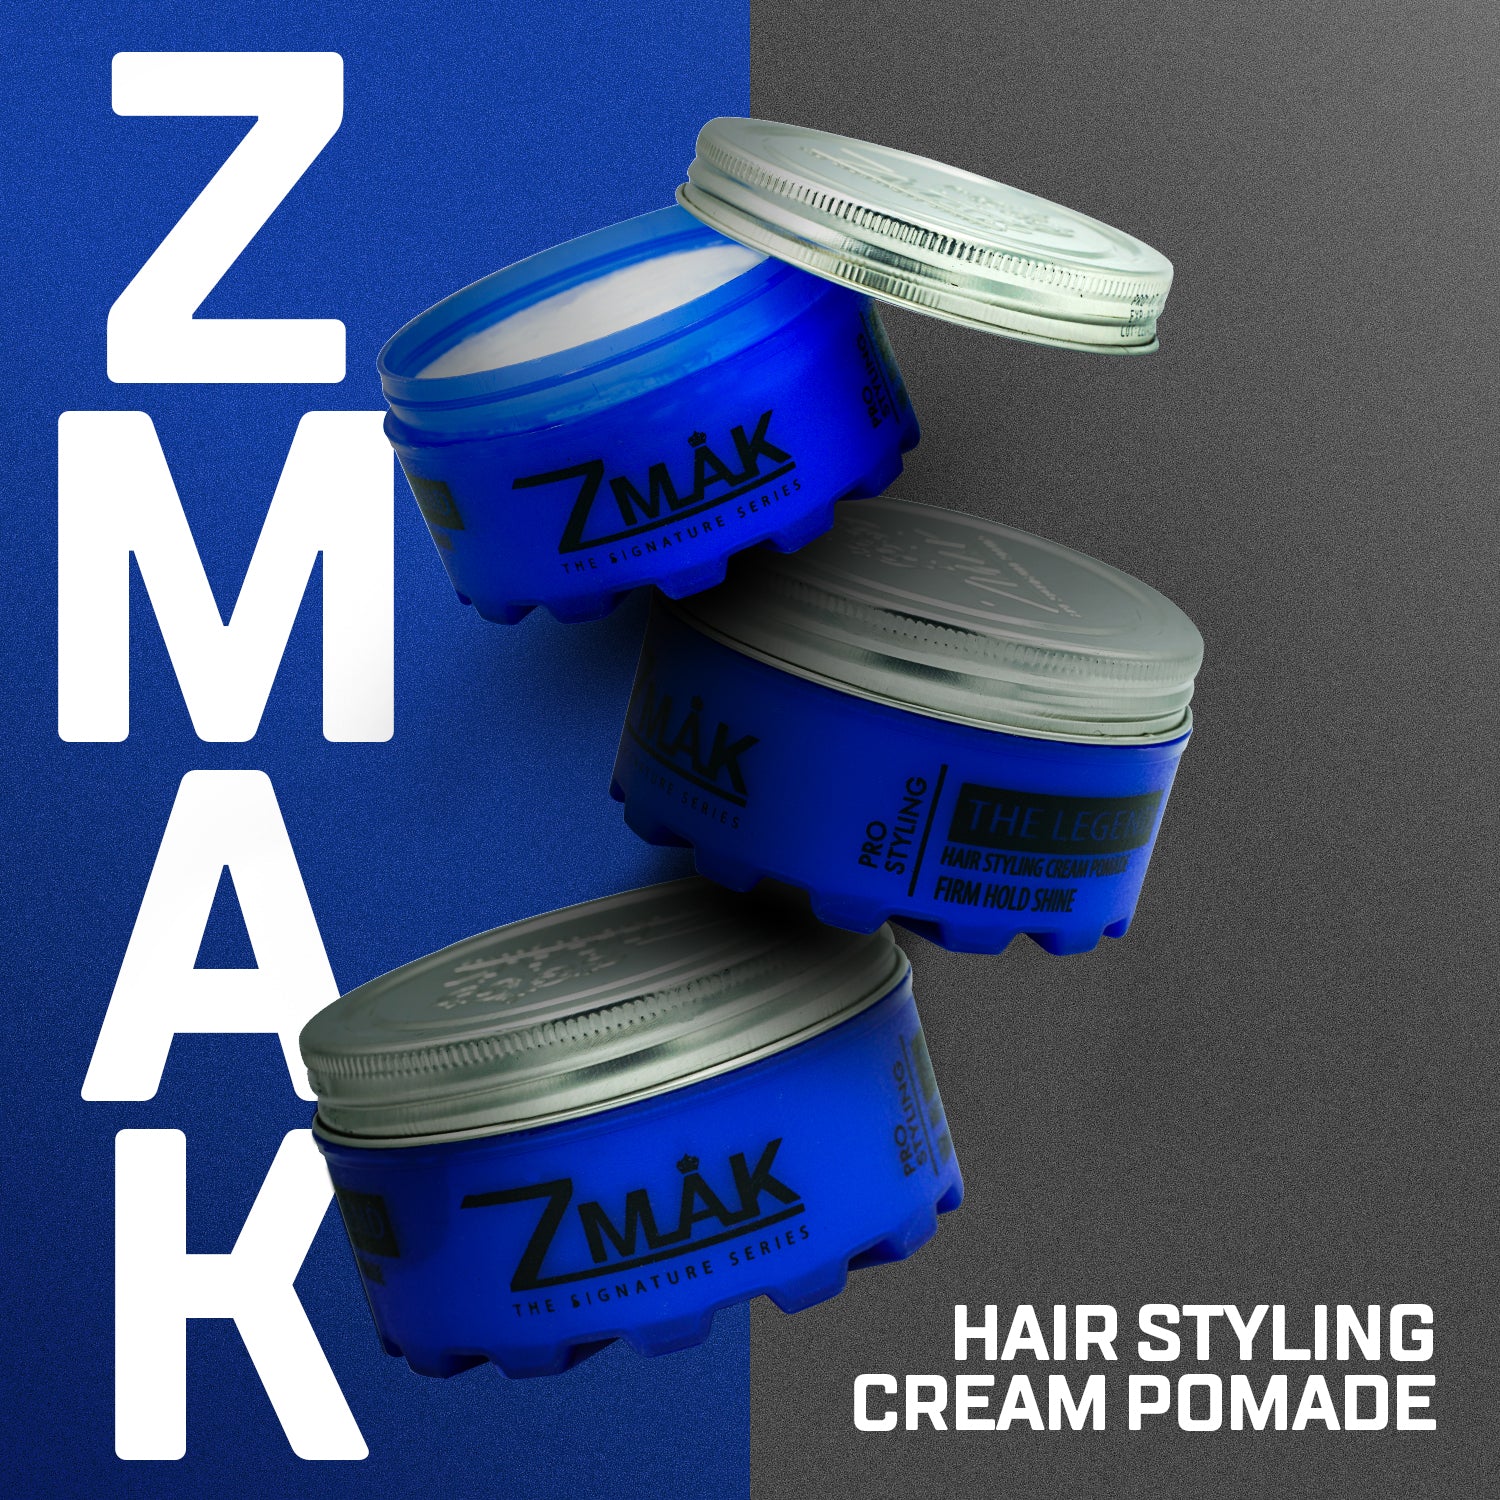 Hair Styling Cream Pomade for Men and Women - Firm Hold - Firm Shine - All Day Hold For All Hairstyles - Easy To Wash Out - Add Volume and Texture (150 ML) - The Legend - ZMAK The Signature Series